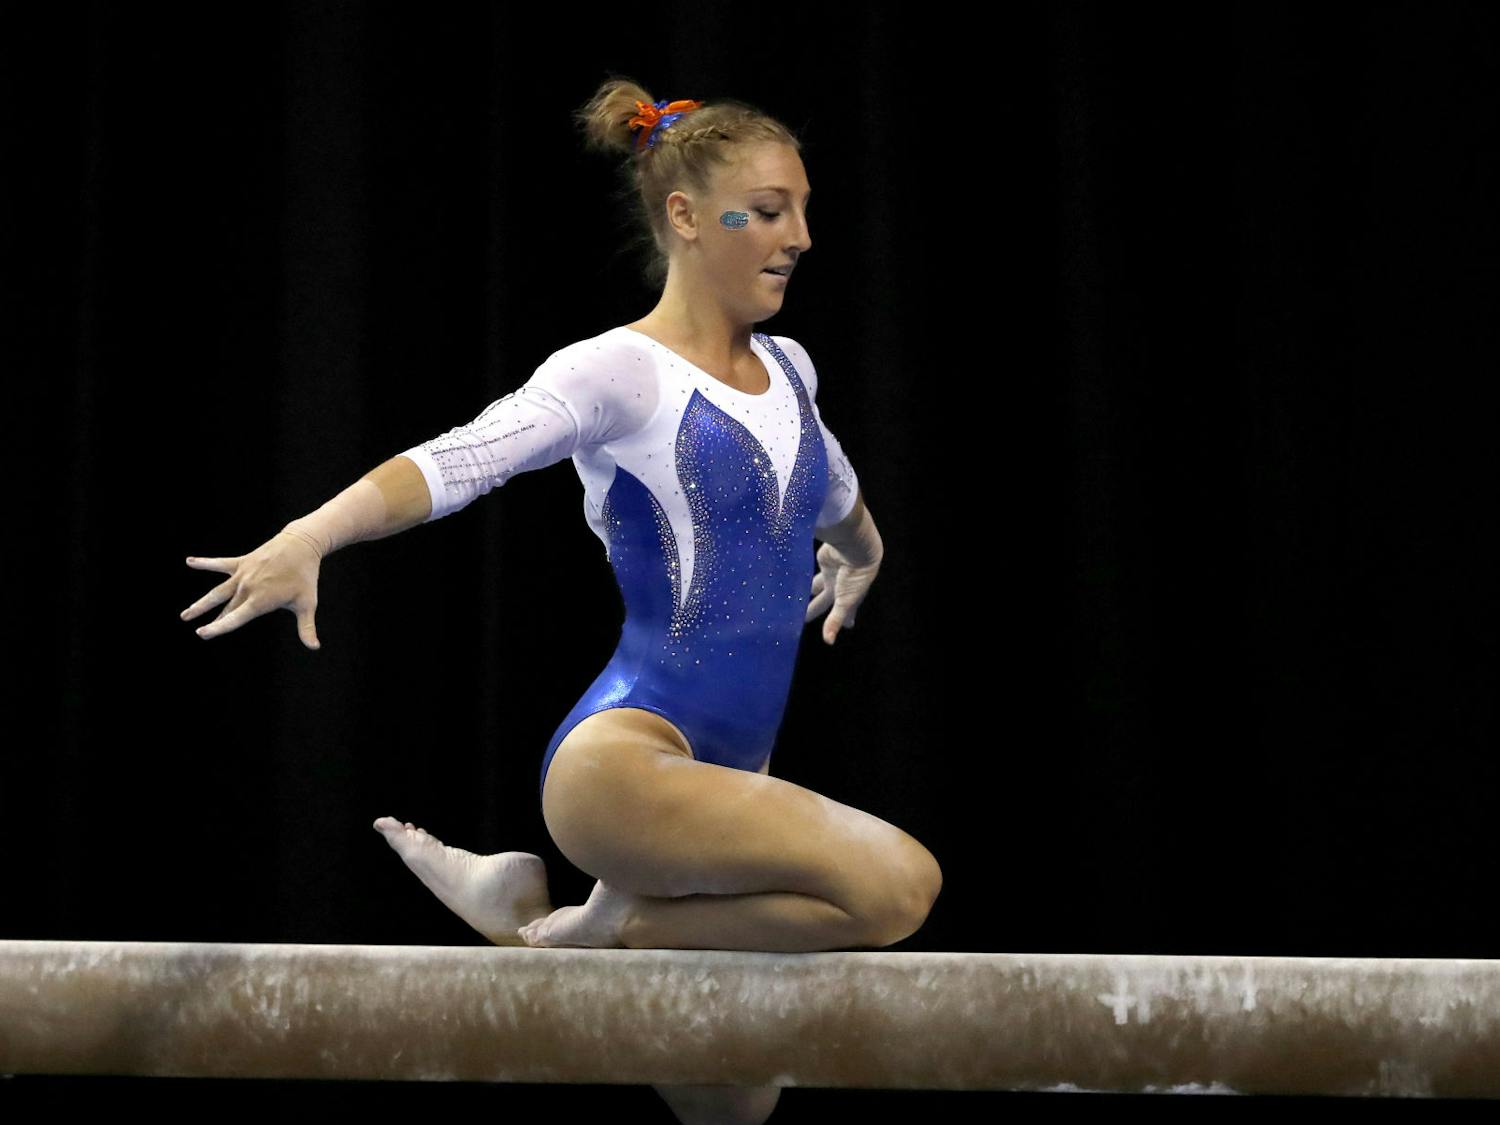 Florida's Alex McMurtry competes on the balance beam during the NCAA college women's gymnastics championships, Saturday, April 15, 2017, in St. Louis. (AP Photo/Jeff Roberson)